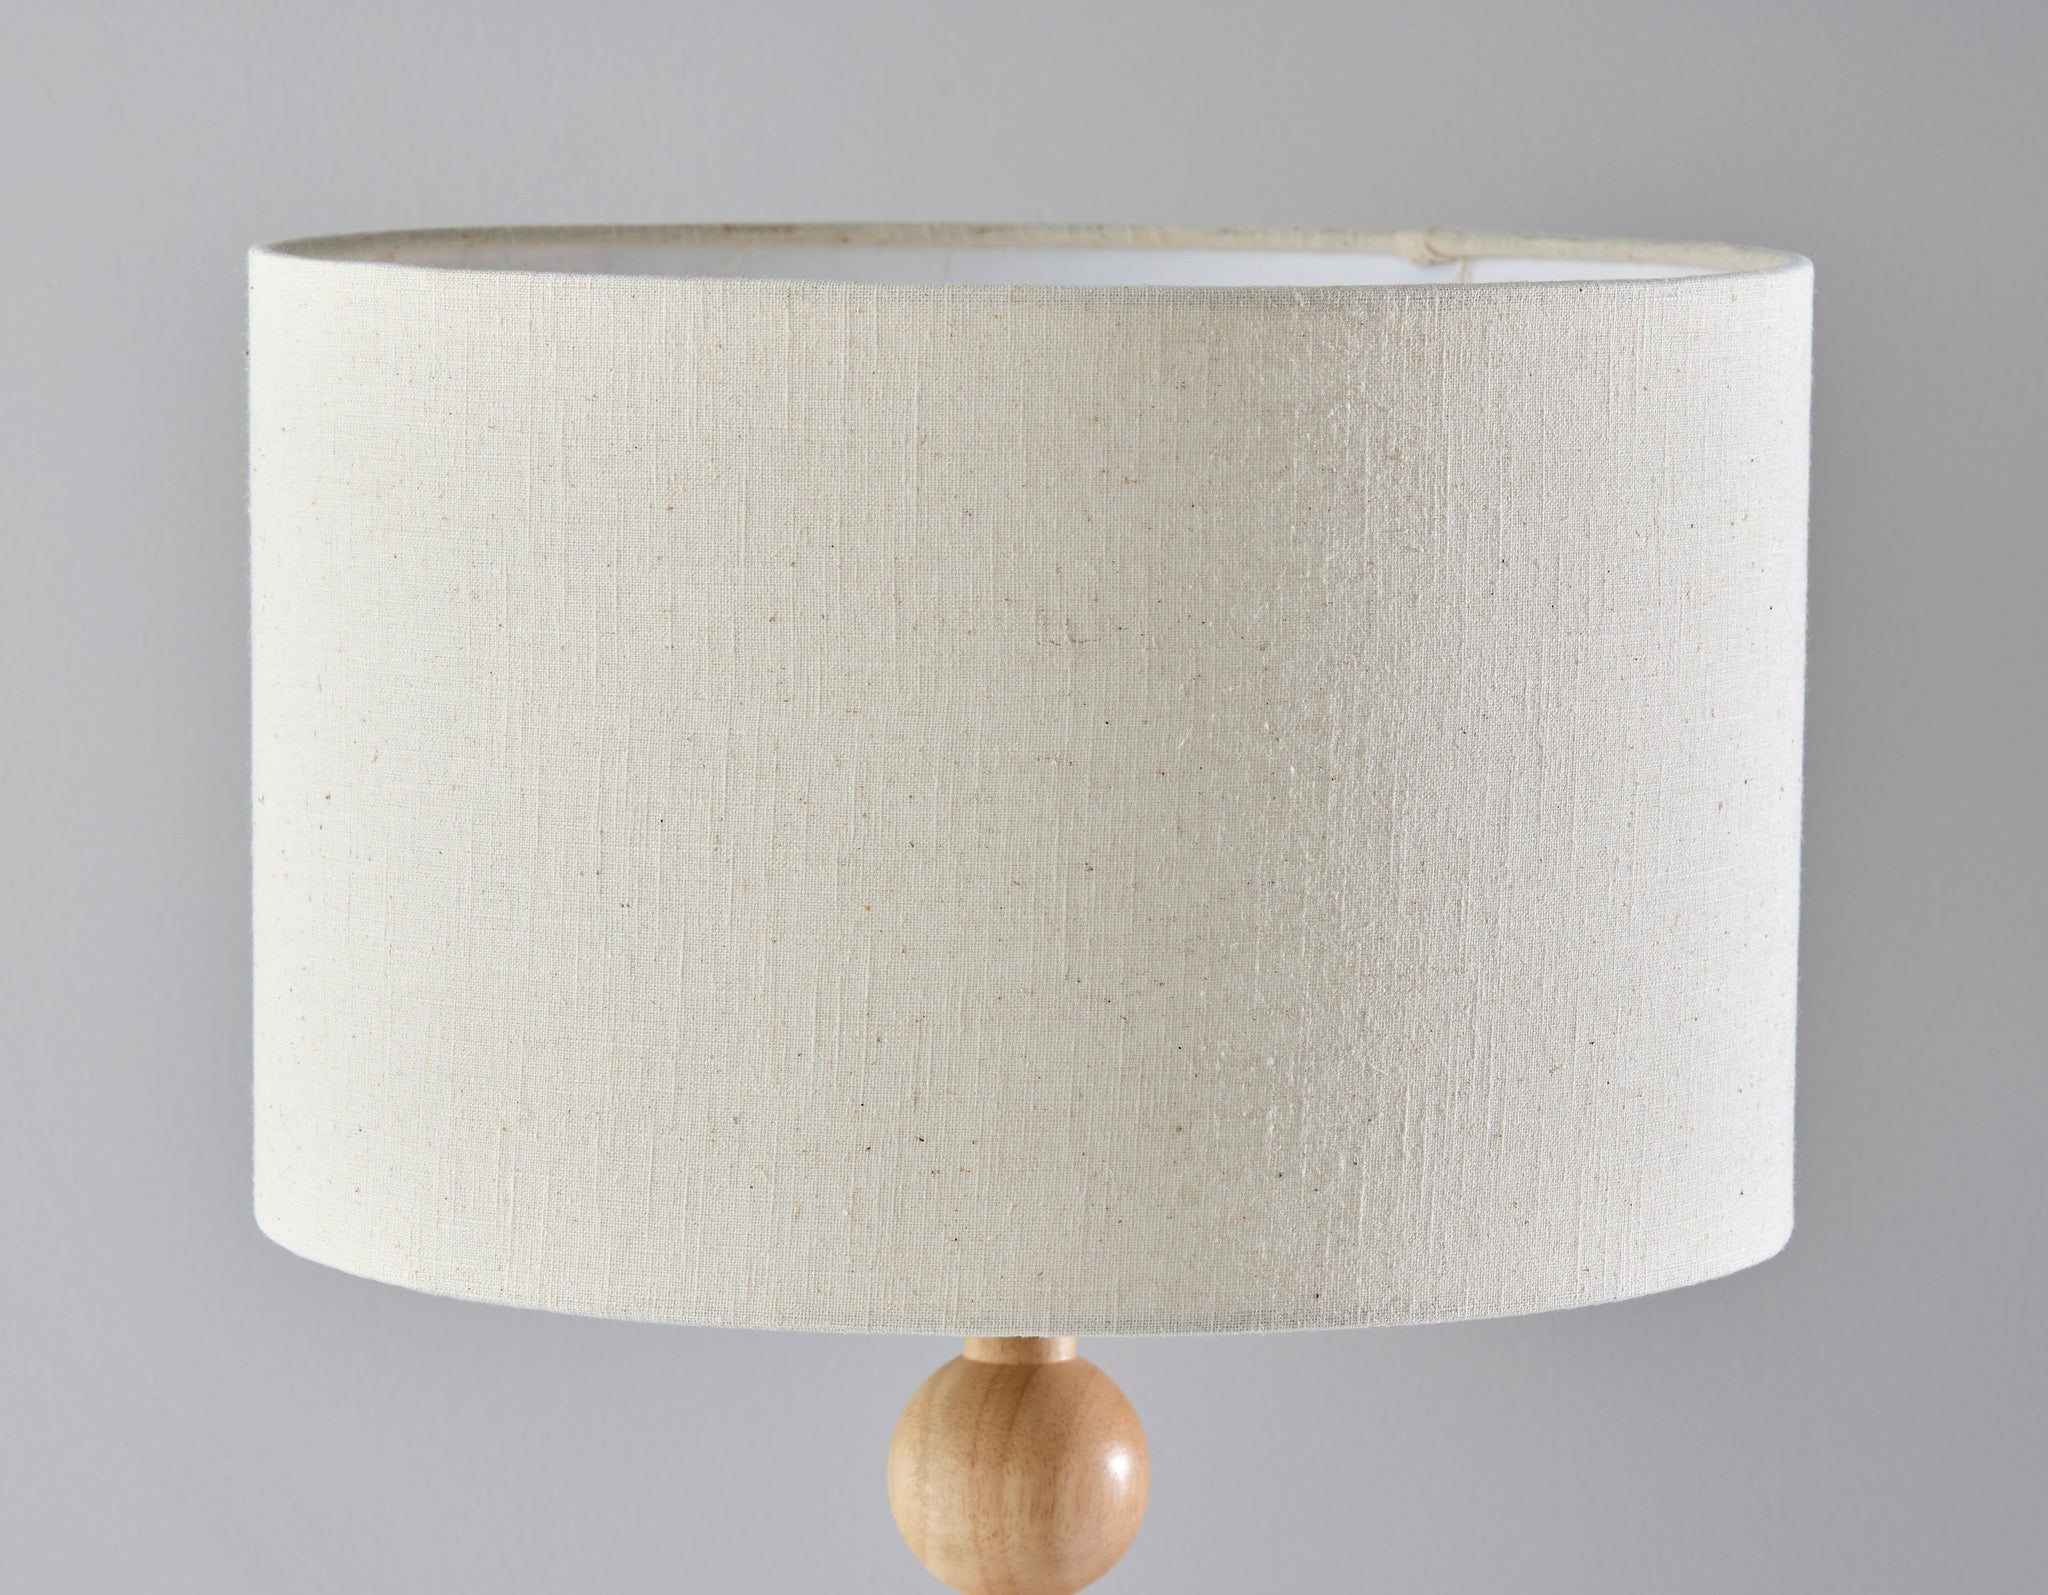 28" Brown Solid Wood Candlestick Table Lamp With Off White Drum Shade